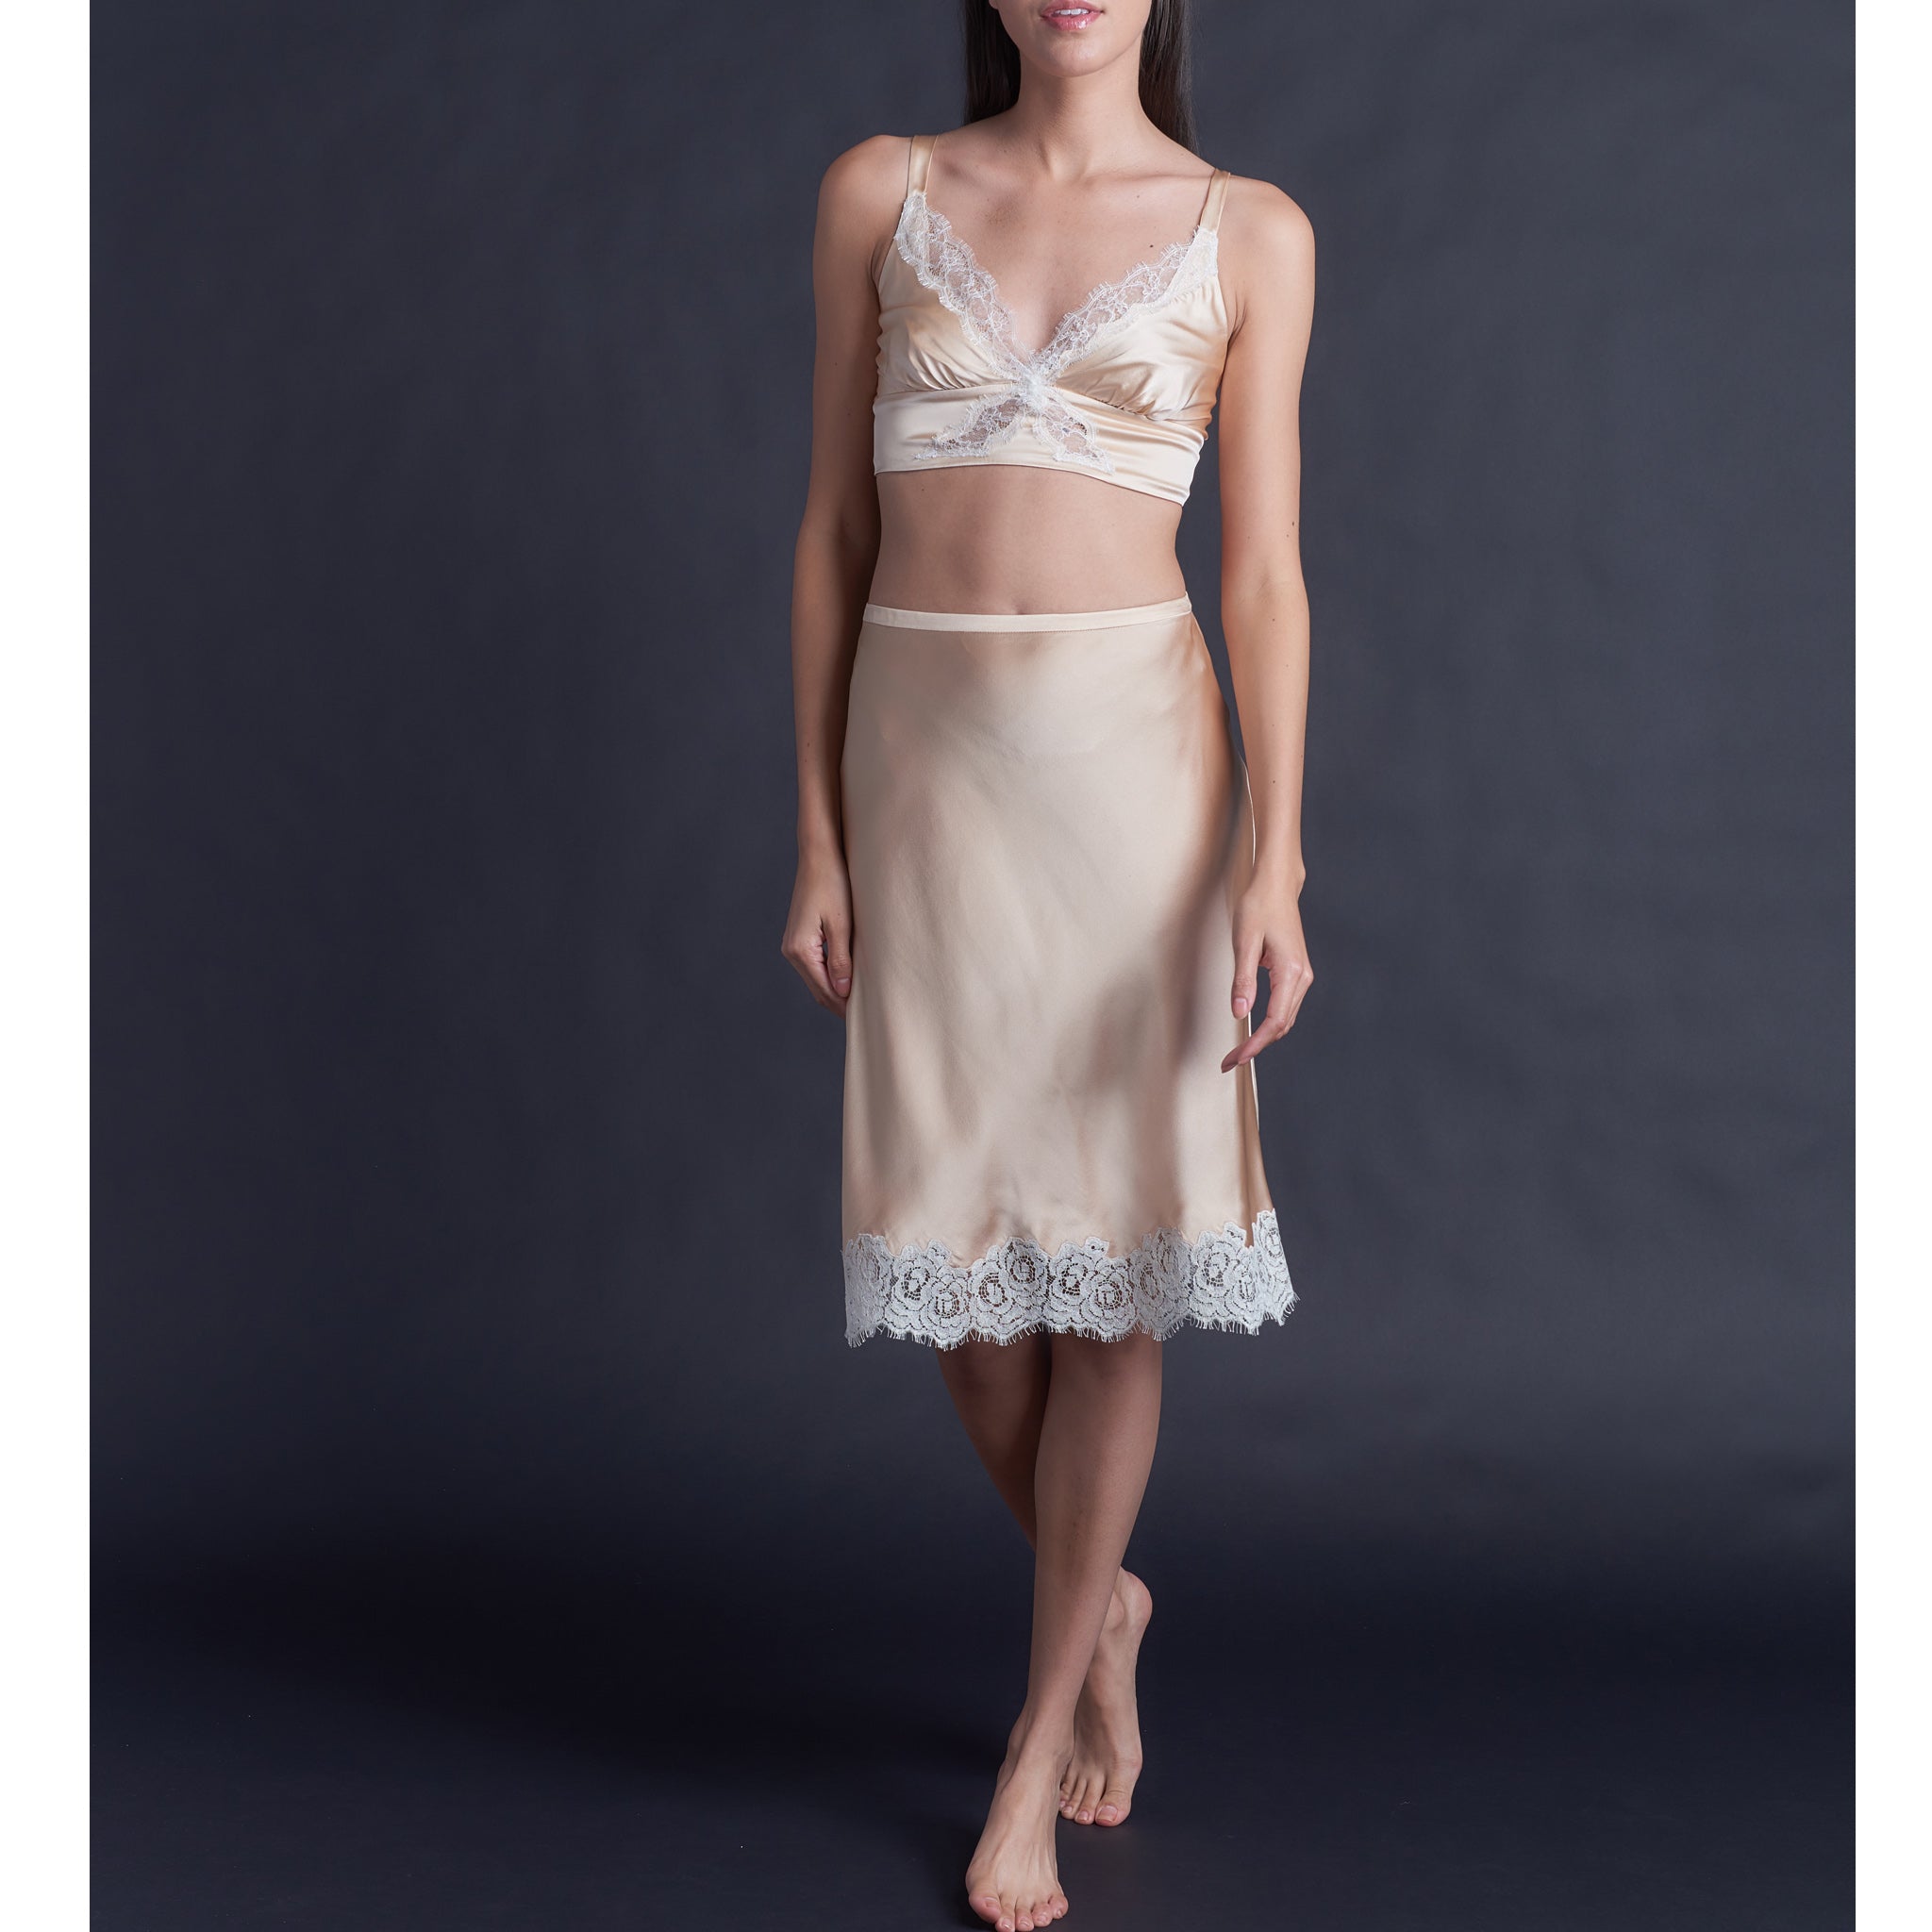 Kali Half Slip in Rose Gold Silk Charmeuse with Ivory Lace